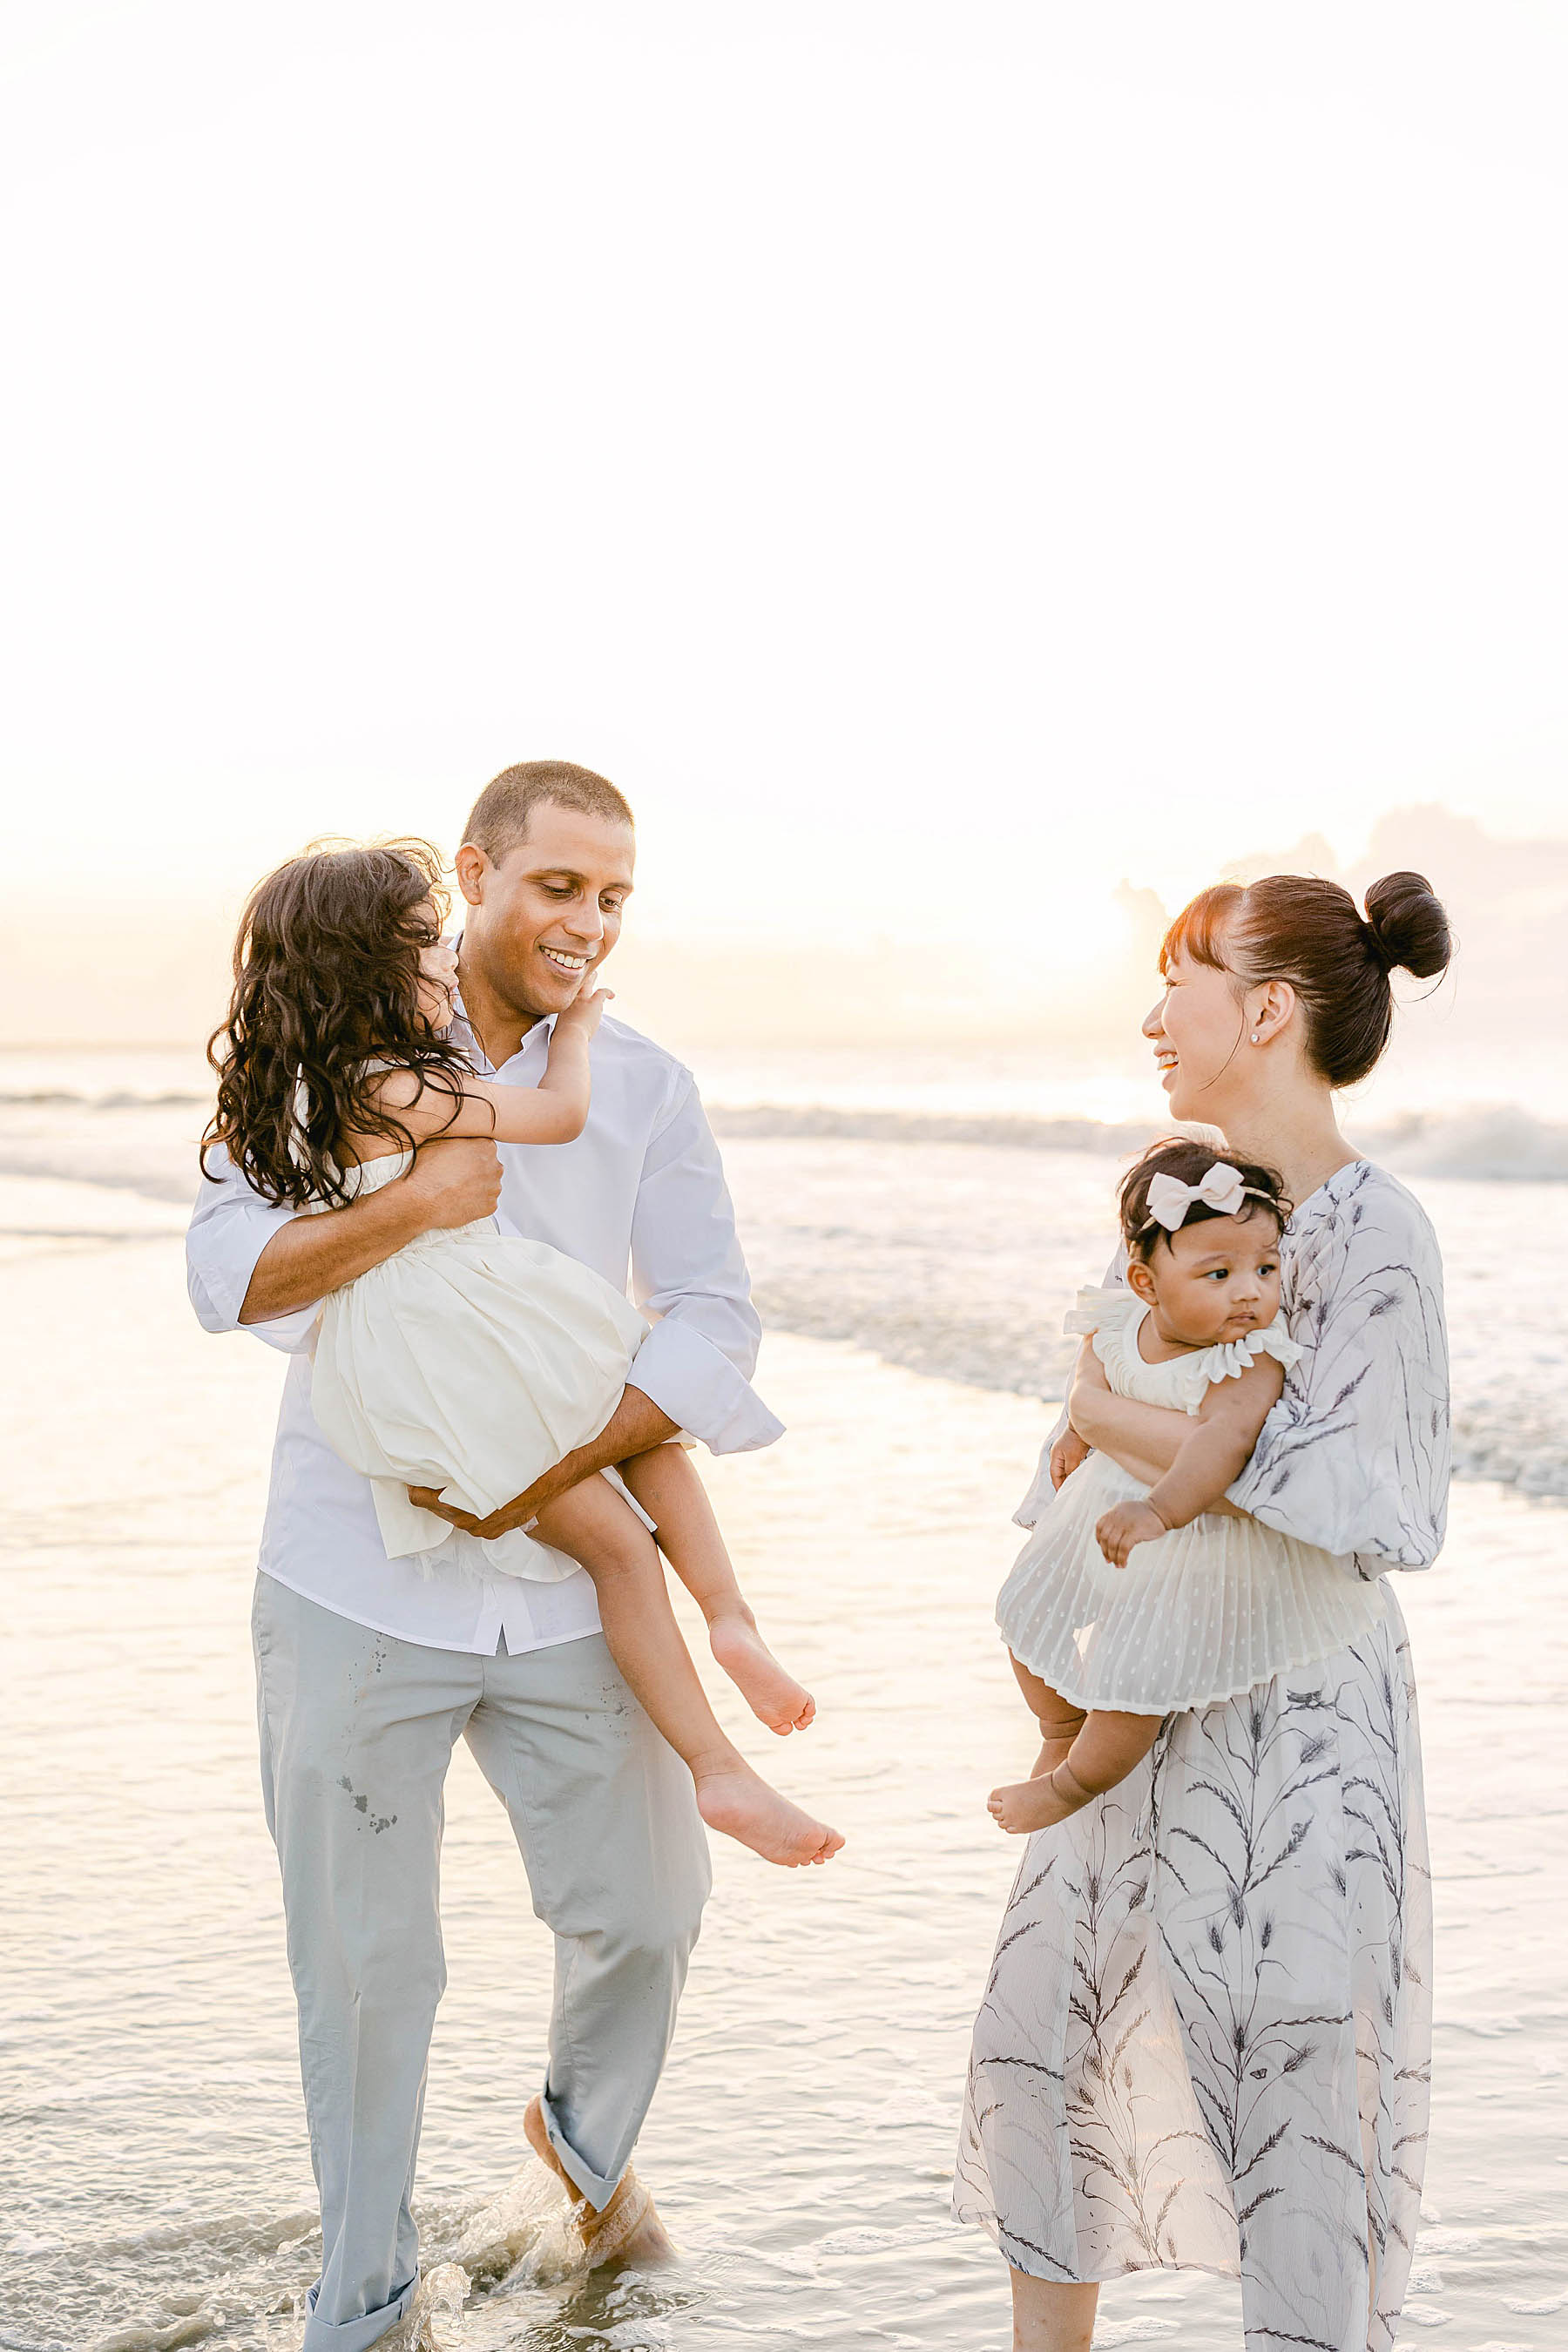 family standing together on the beach at sunrise wearing white